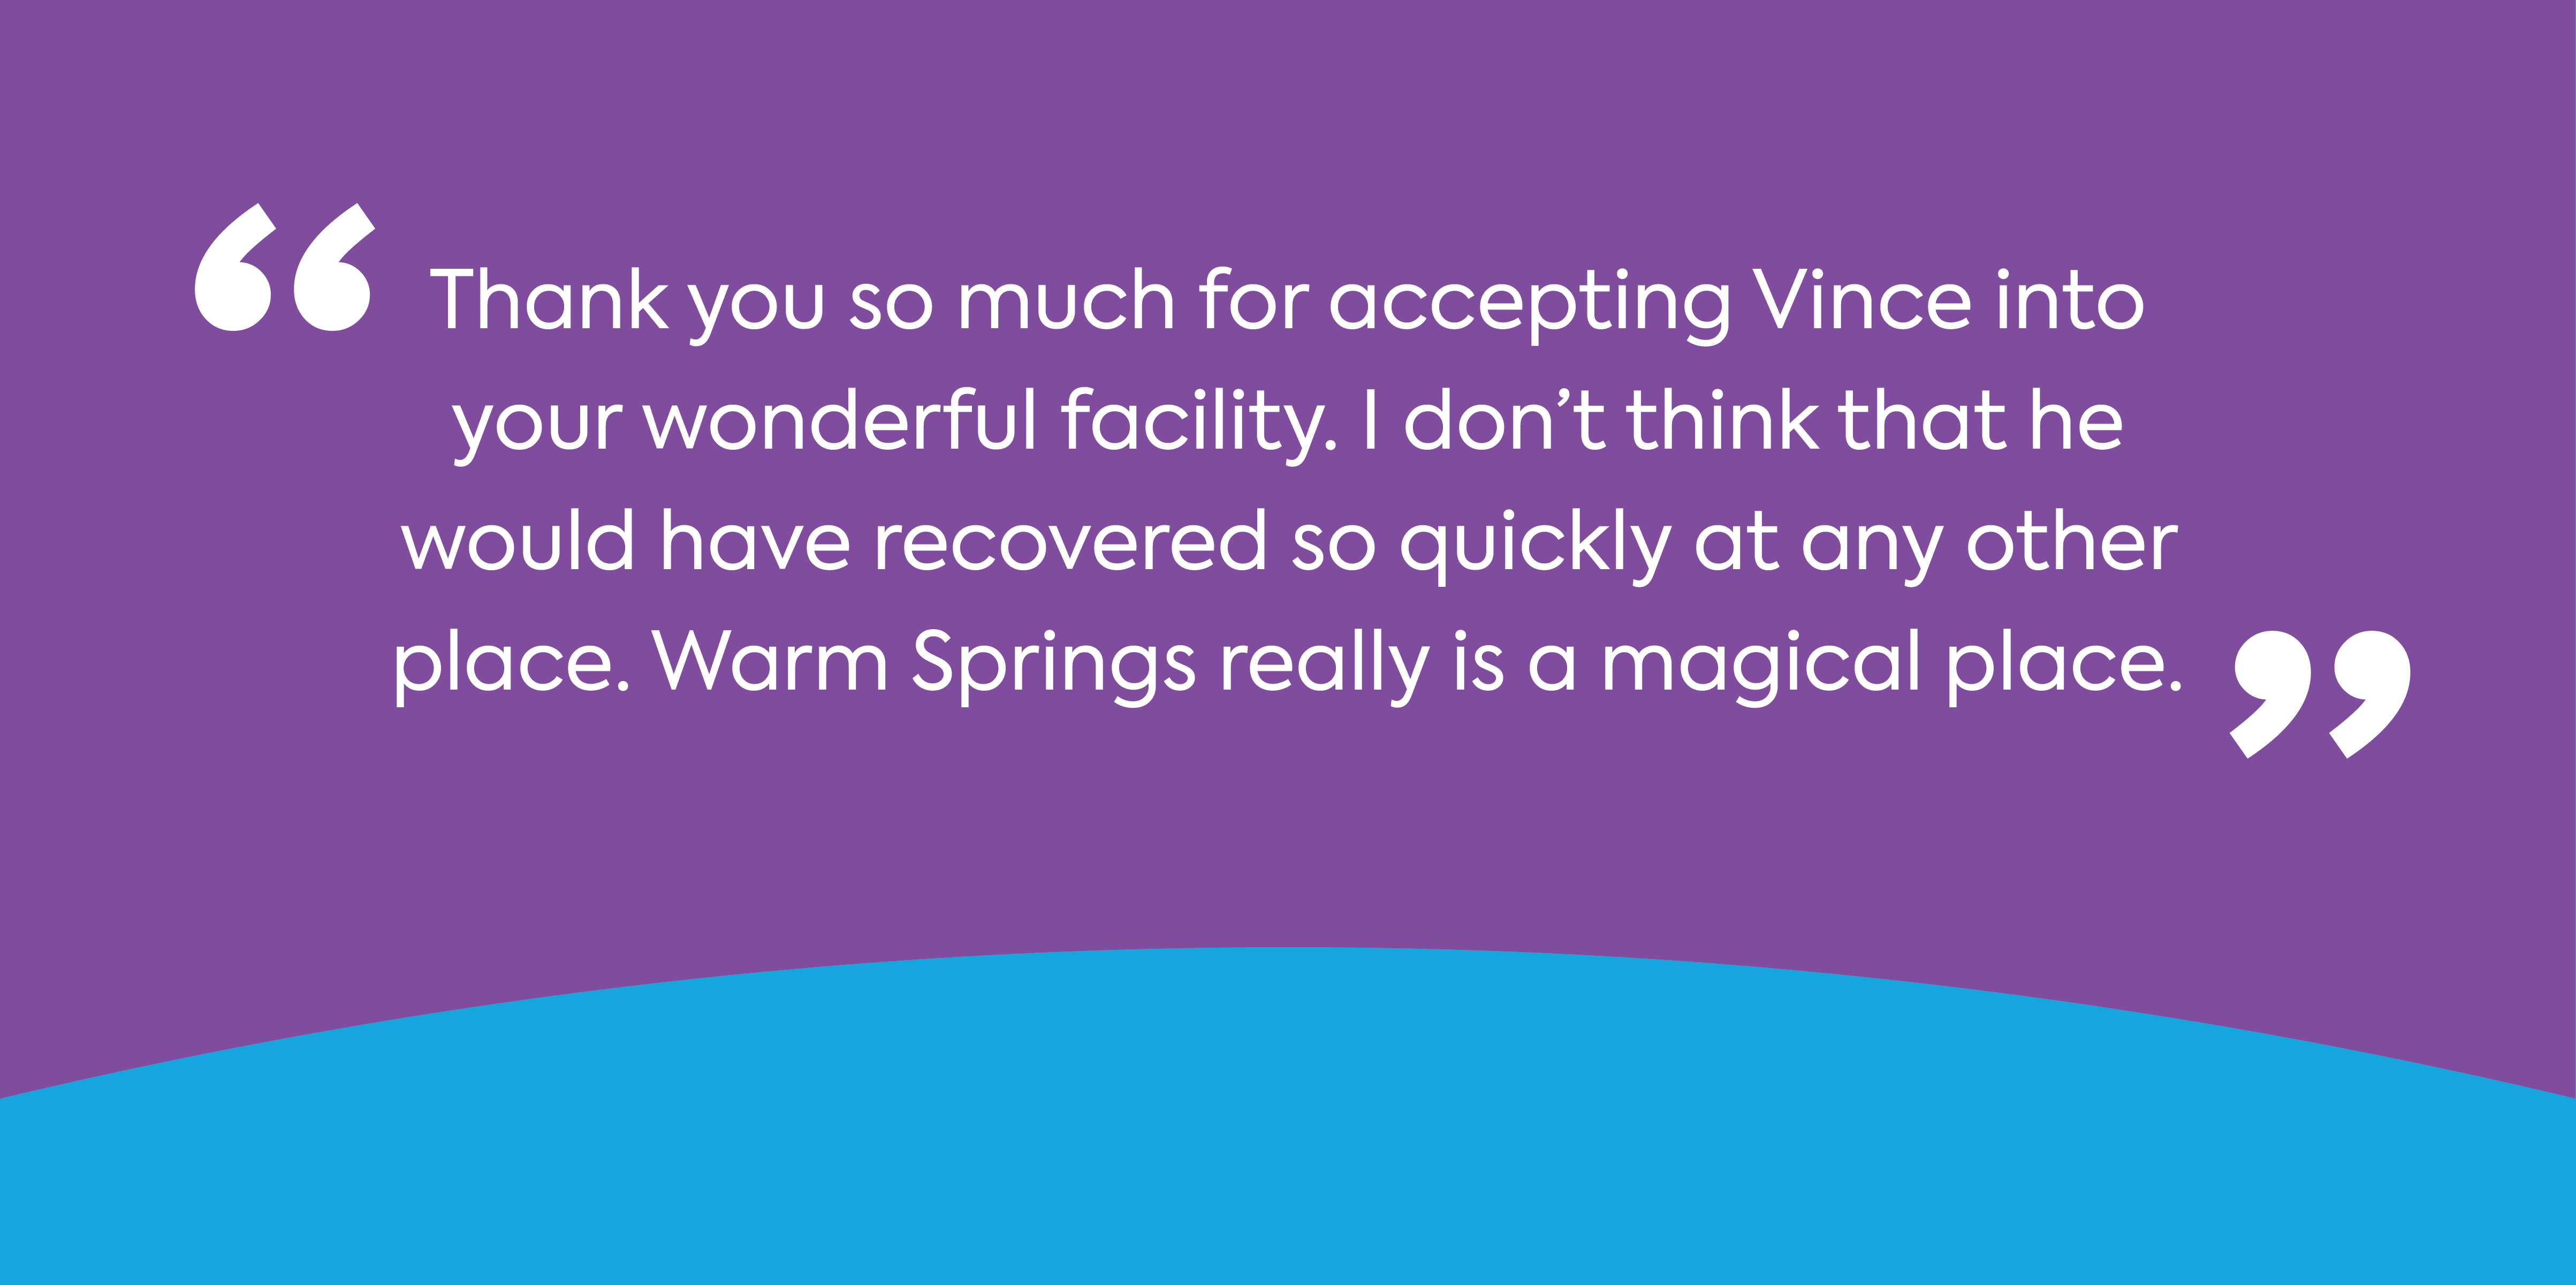 Text: Thank you so much for accepting Vince into your wonderful facility. I don't think that he would have recovered so quickly at any other place. Warm Springs really is a magical place.